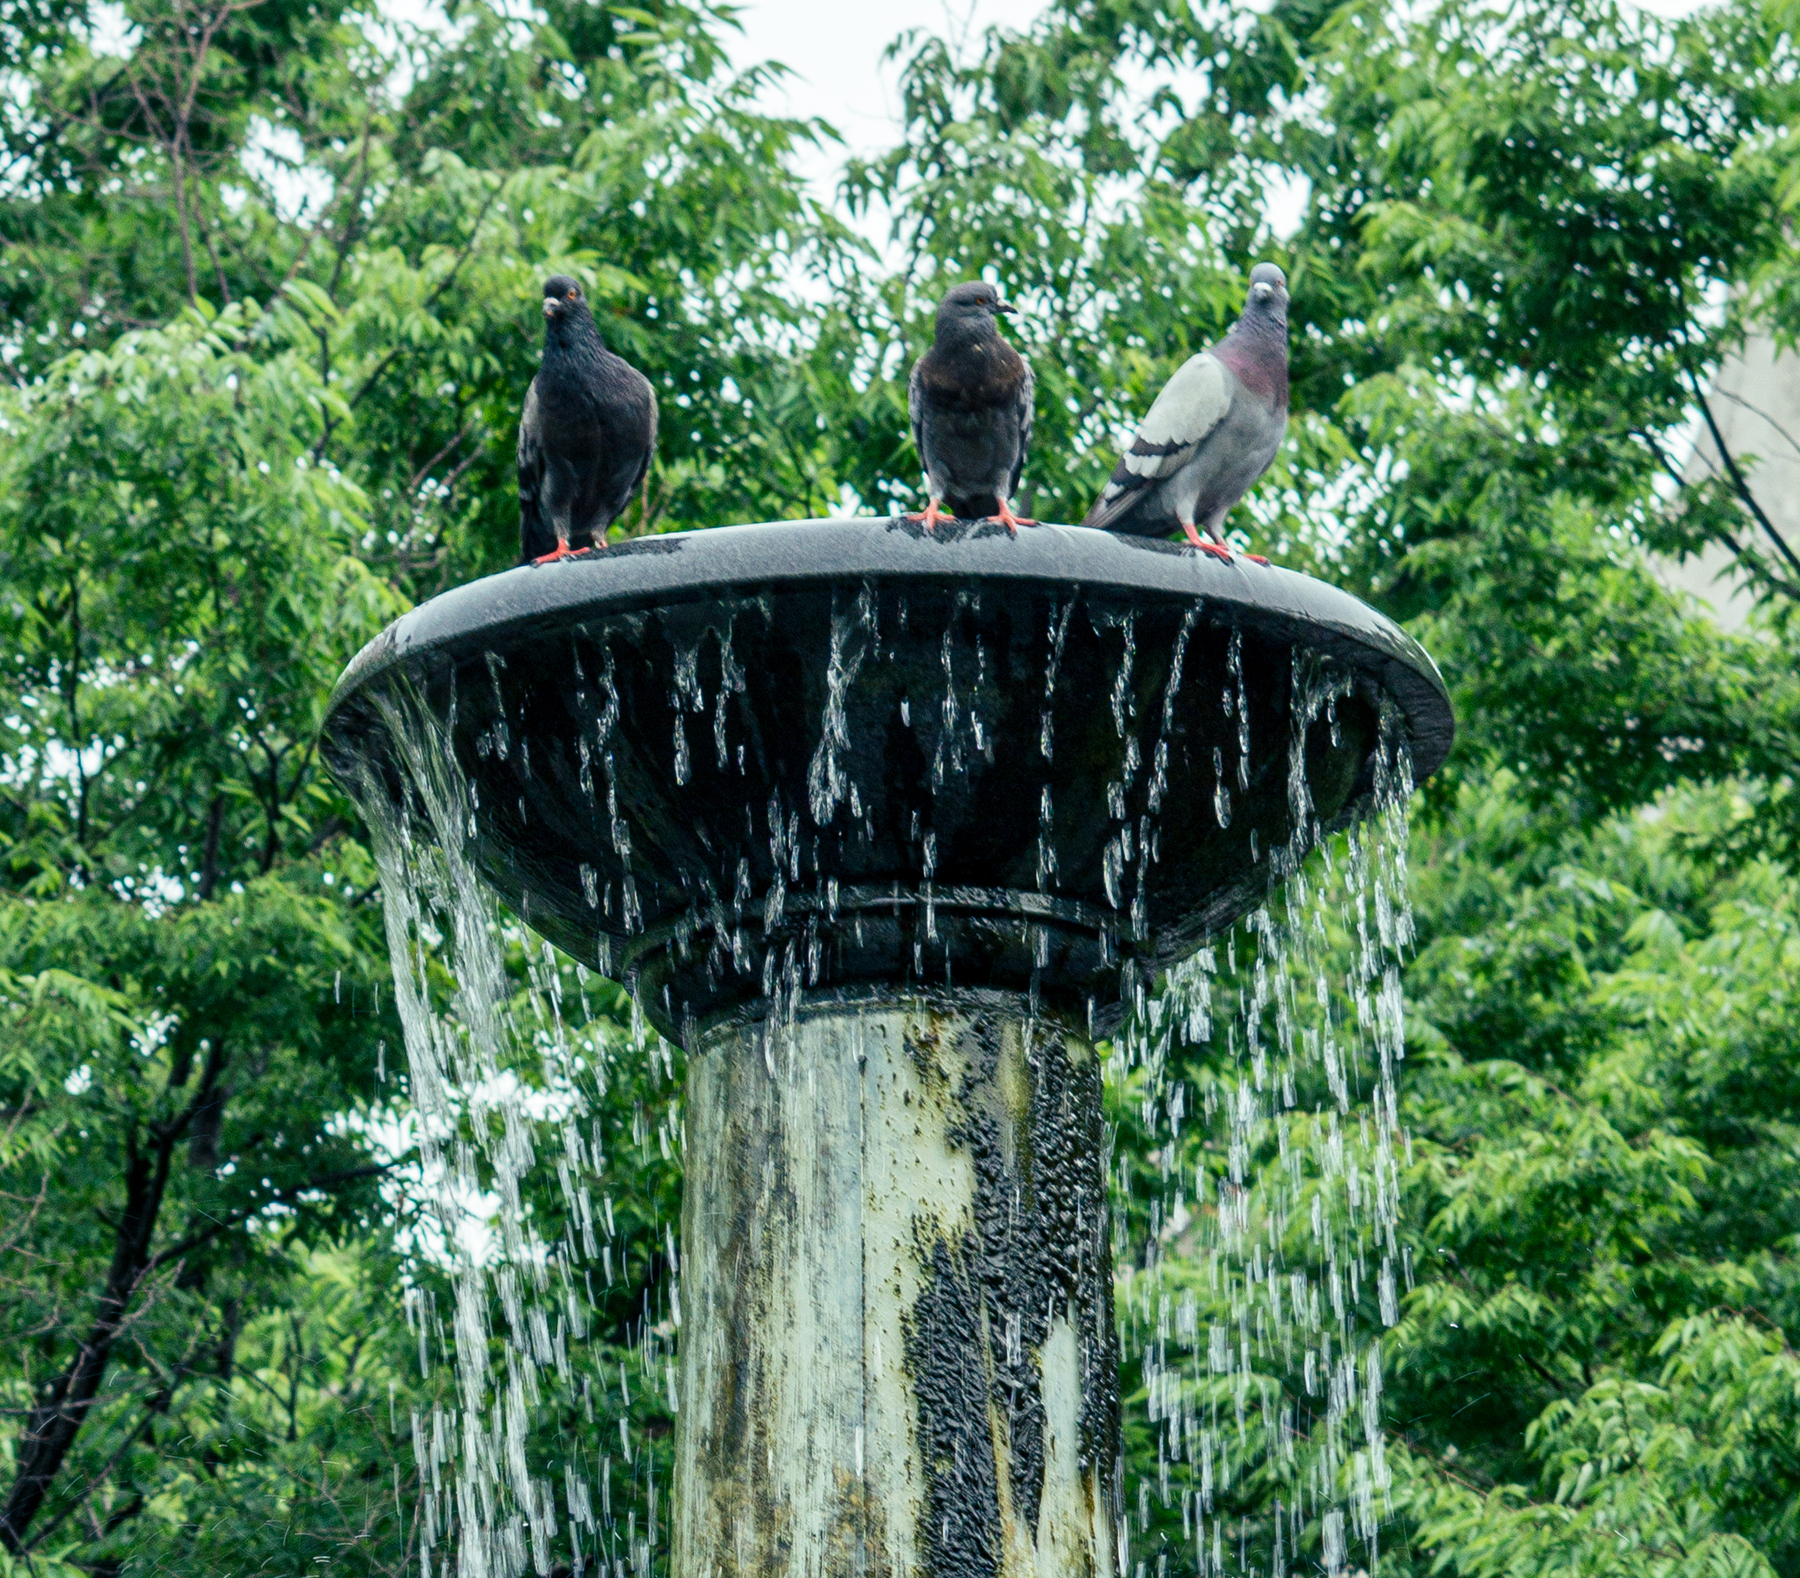 A water fountain with water dripping down. On top, three pigeons are looking around 